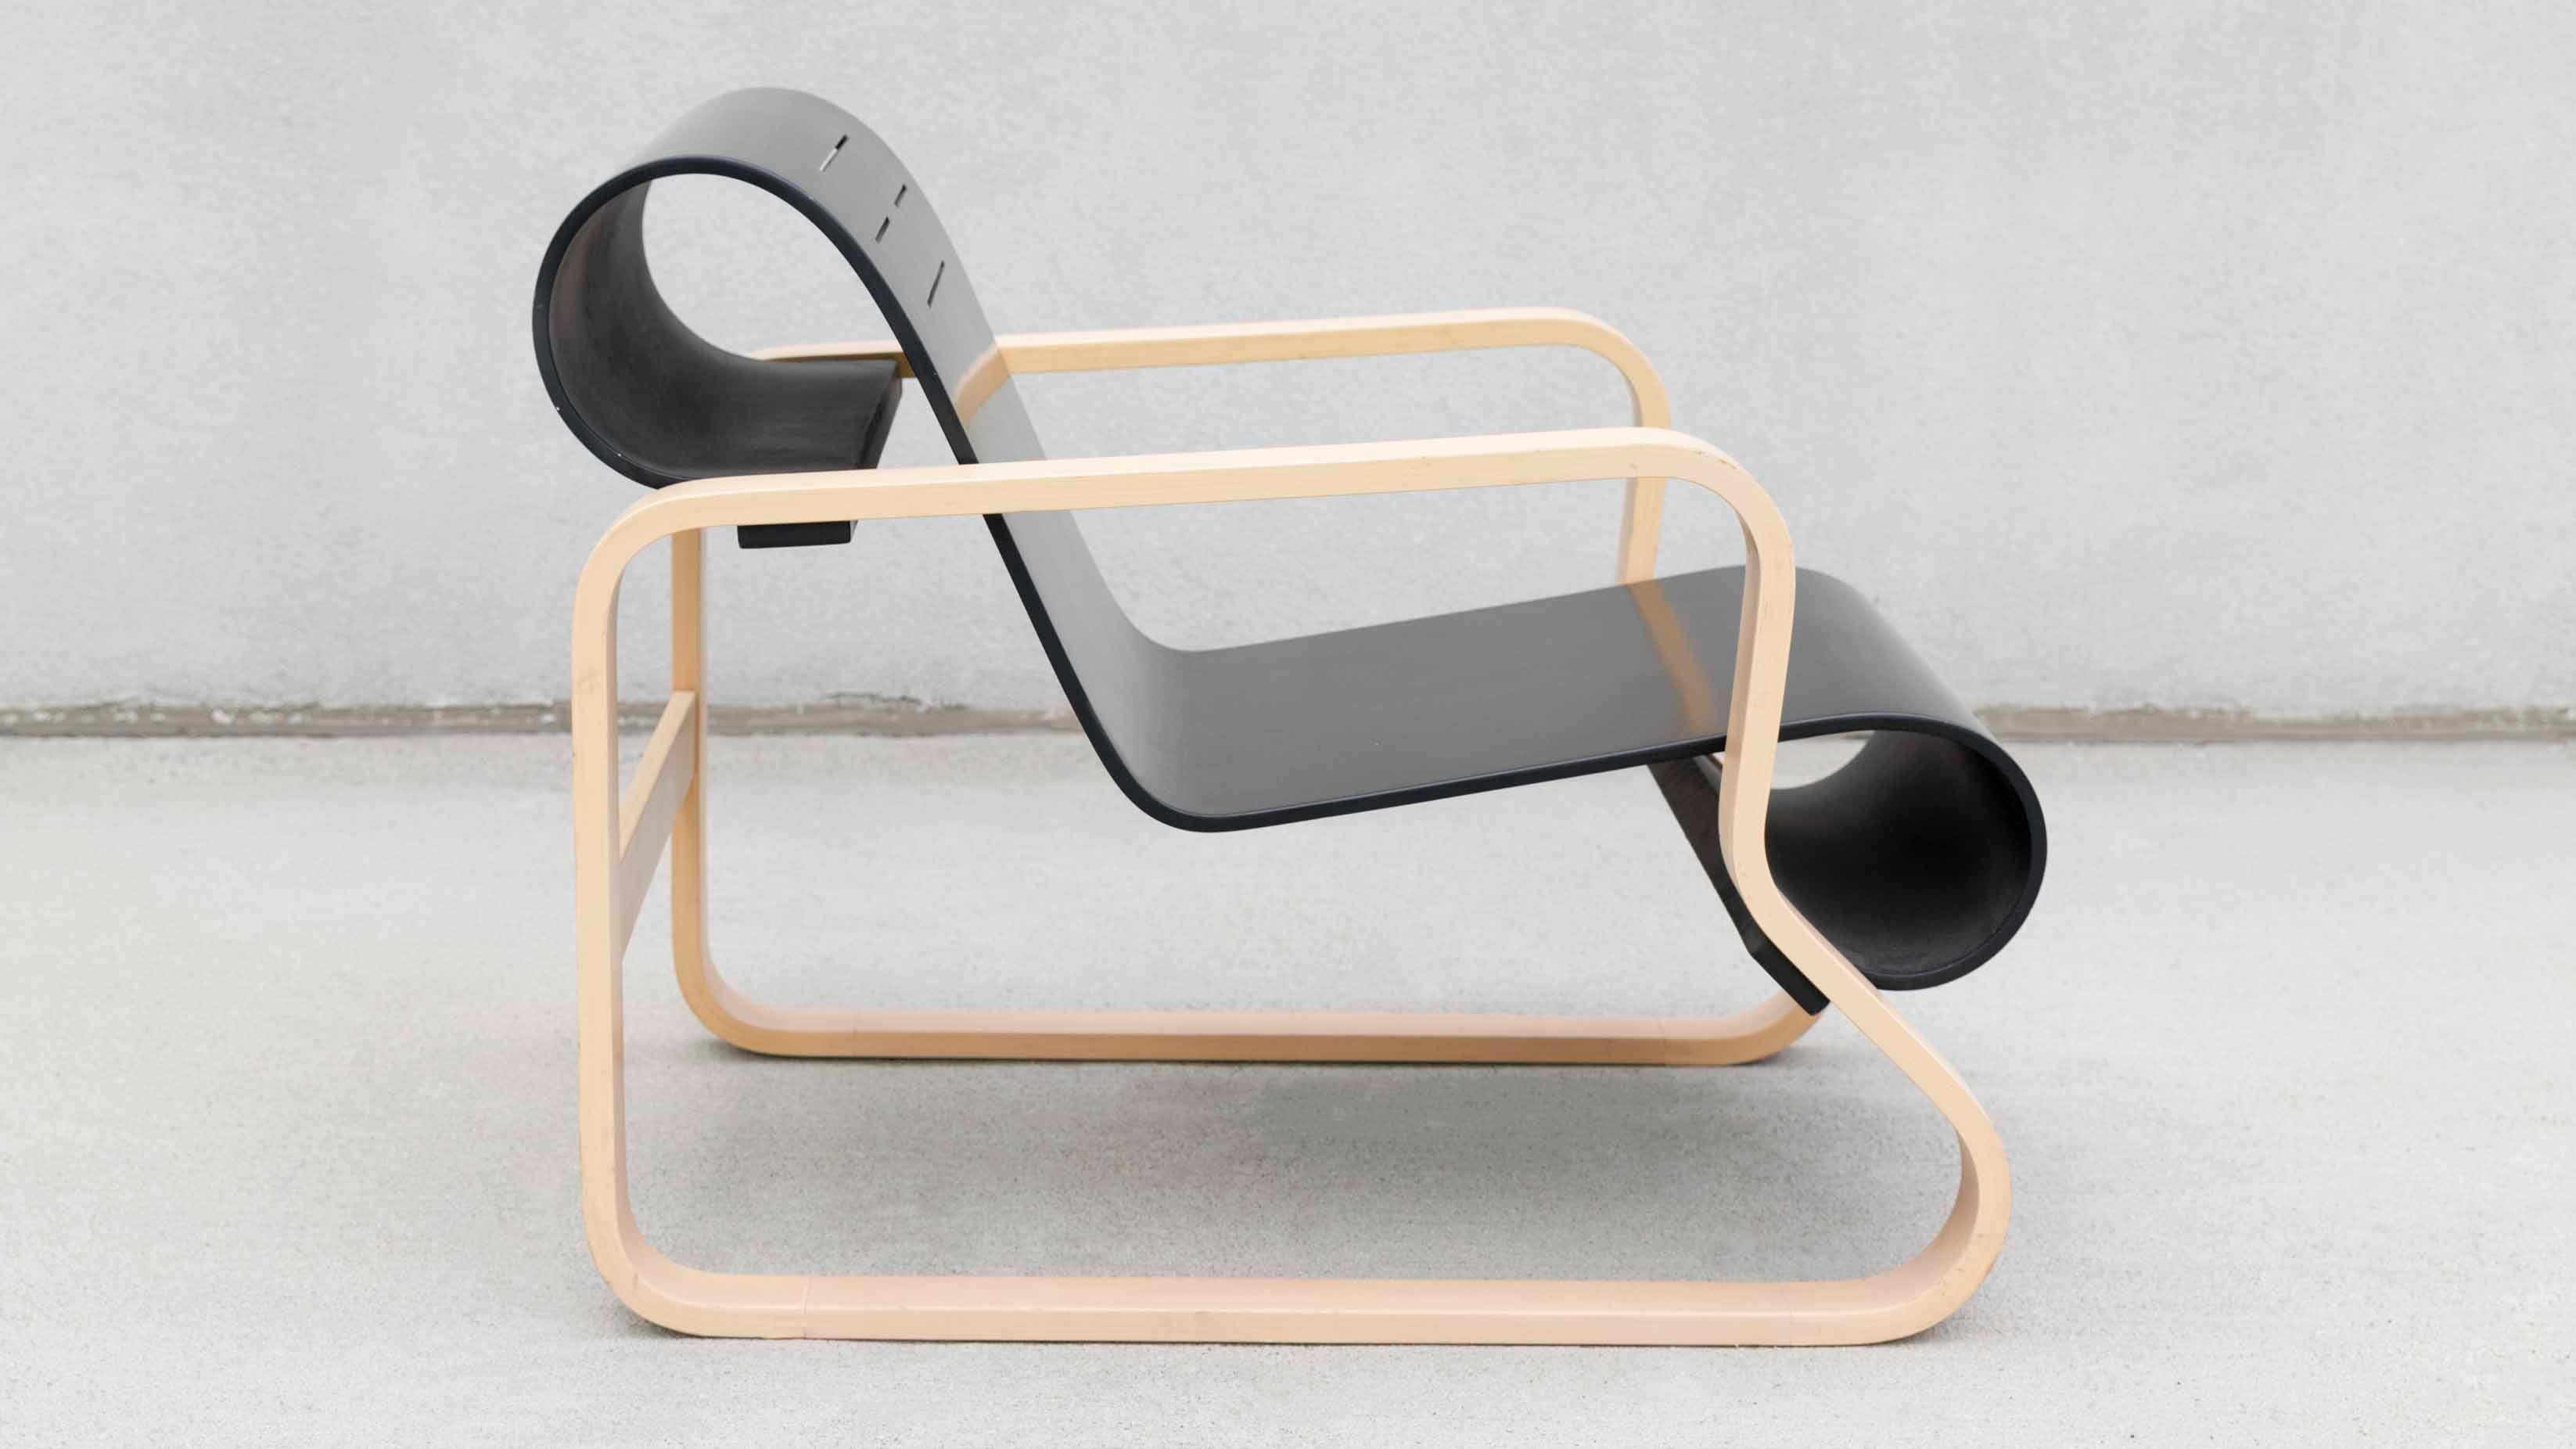 The Paimio “Chair 41” was originally designed by Alvar Aalto for the Paimio Sanatorium in Southwest Finland in order to help the Tuberculosis patients breathe more easily while sitting. Artek began production of this design in 1931 and still